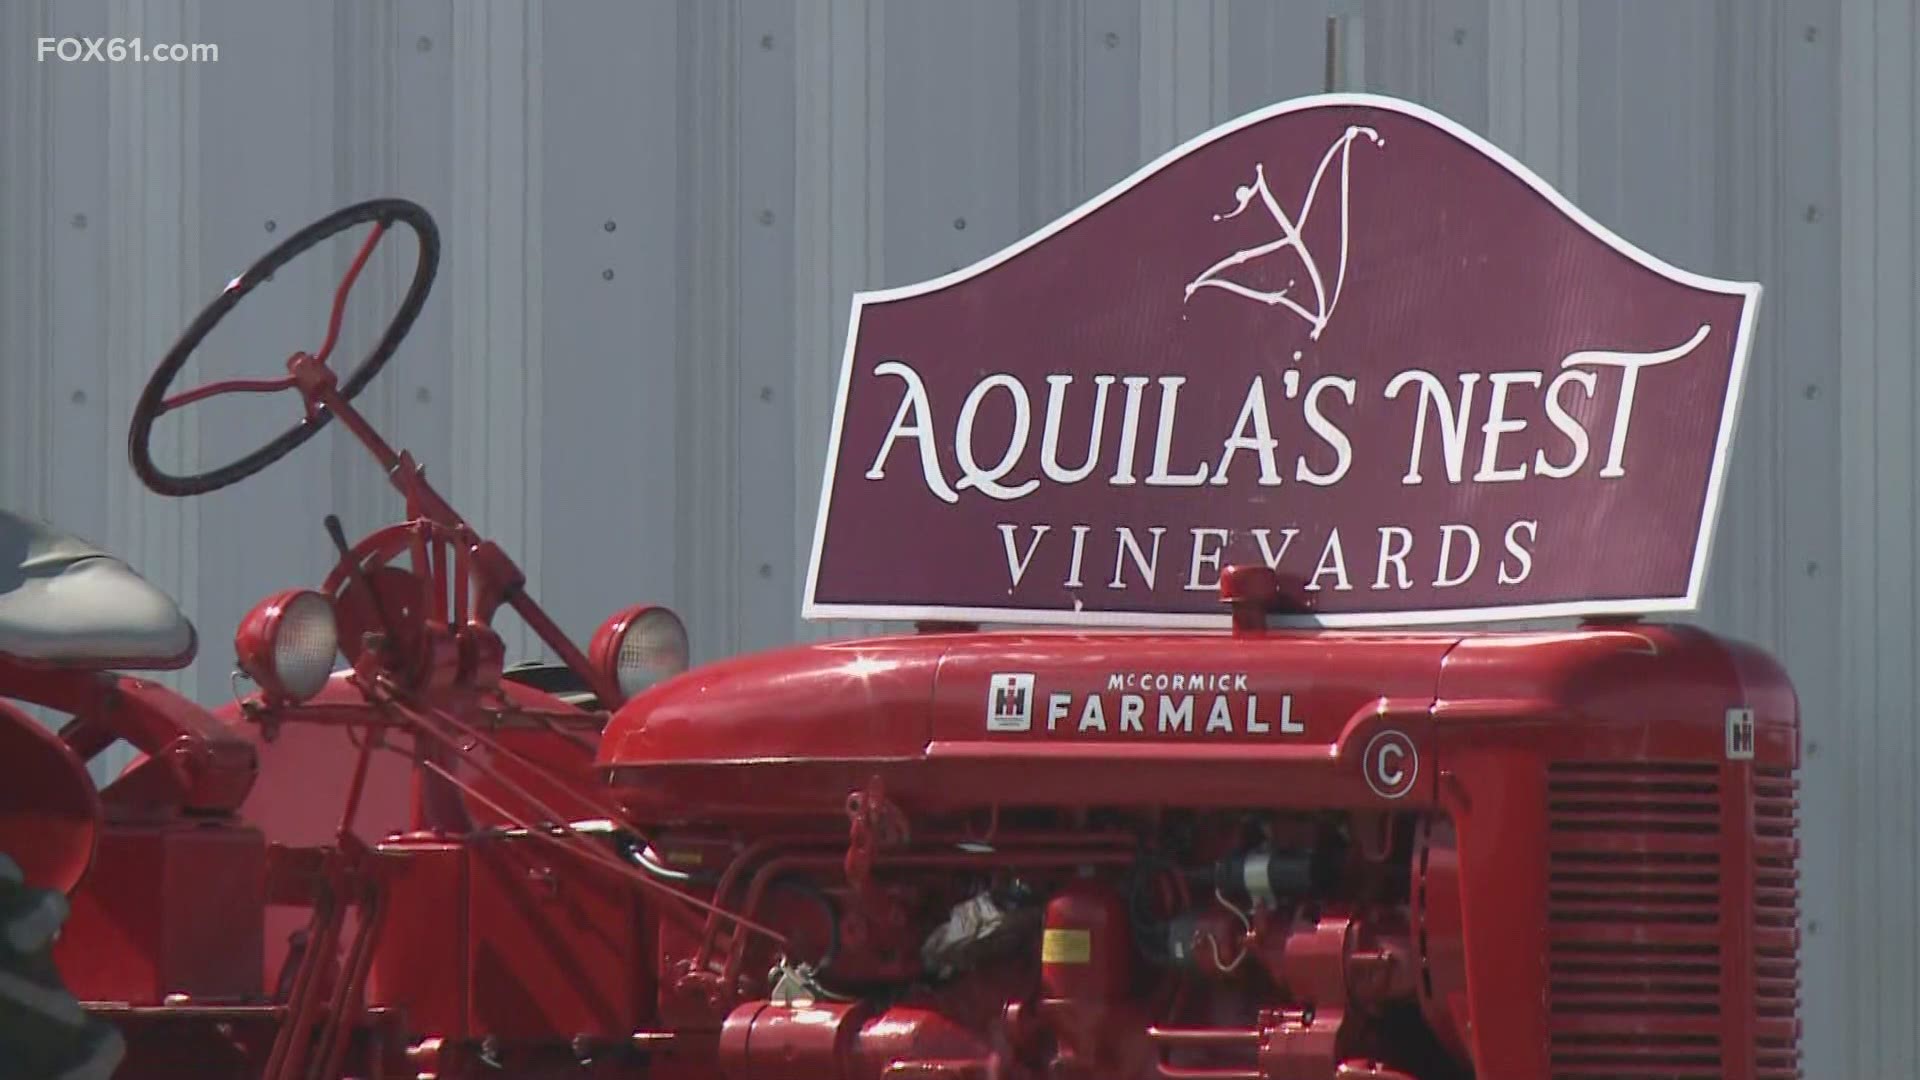 Aquila’s Nest Vineyard was preparing to welcome customers as spacing limitations eased Friday.